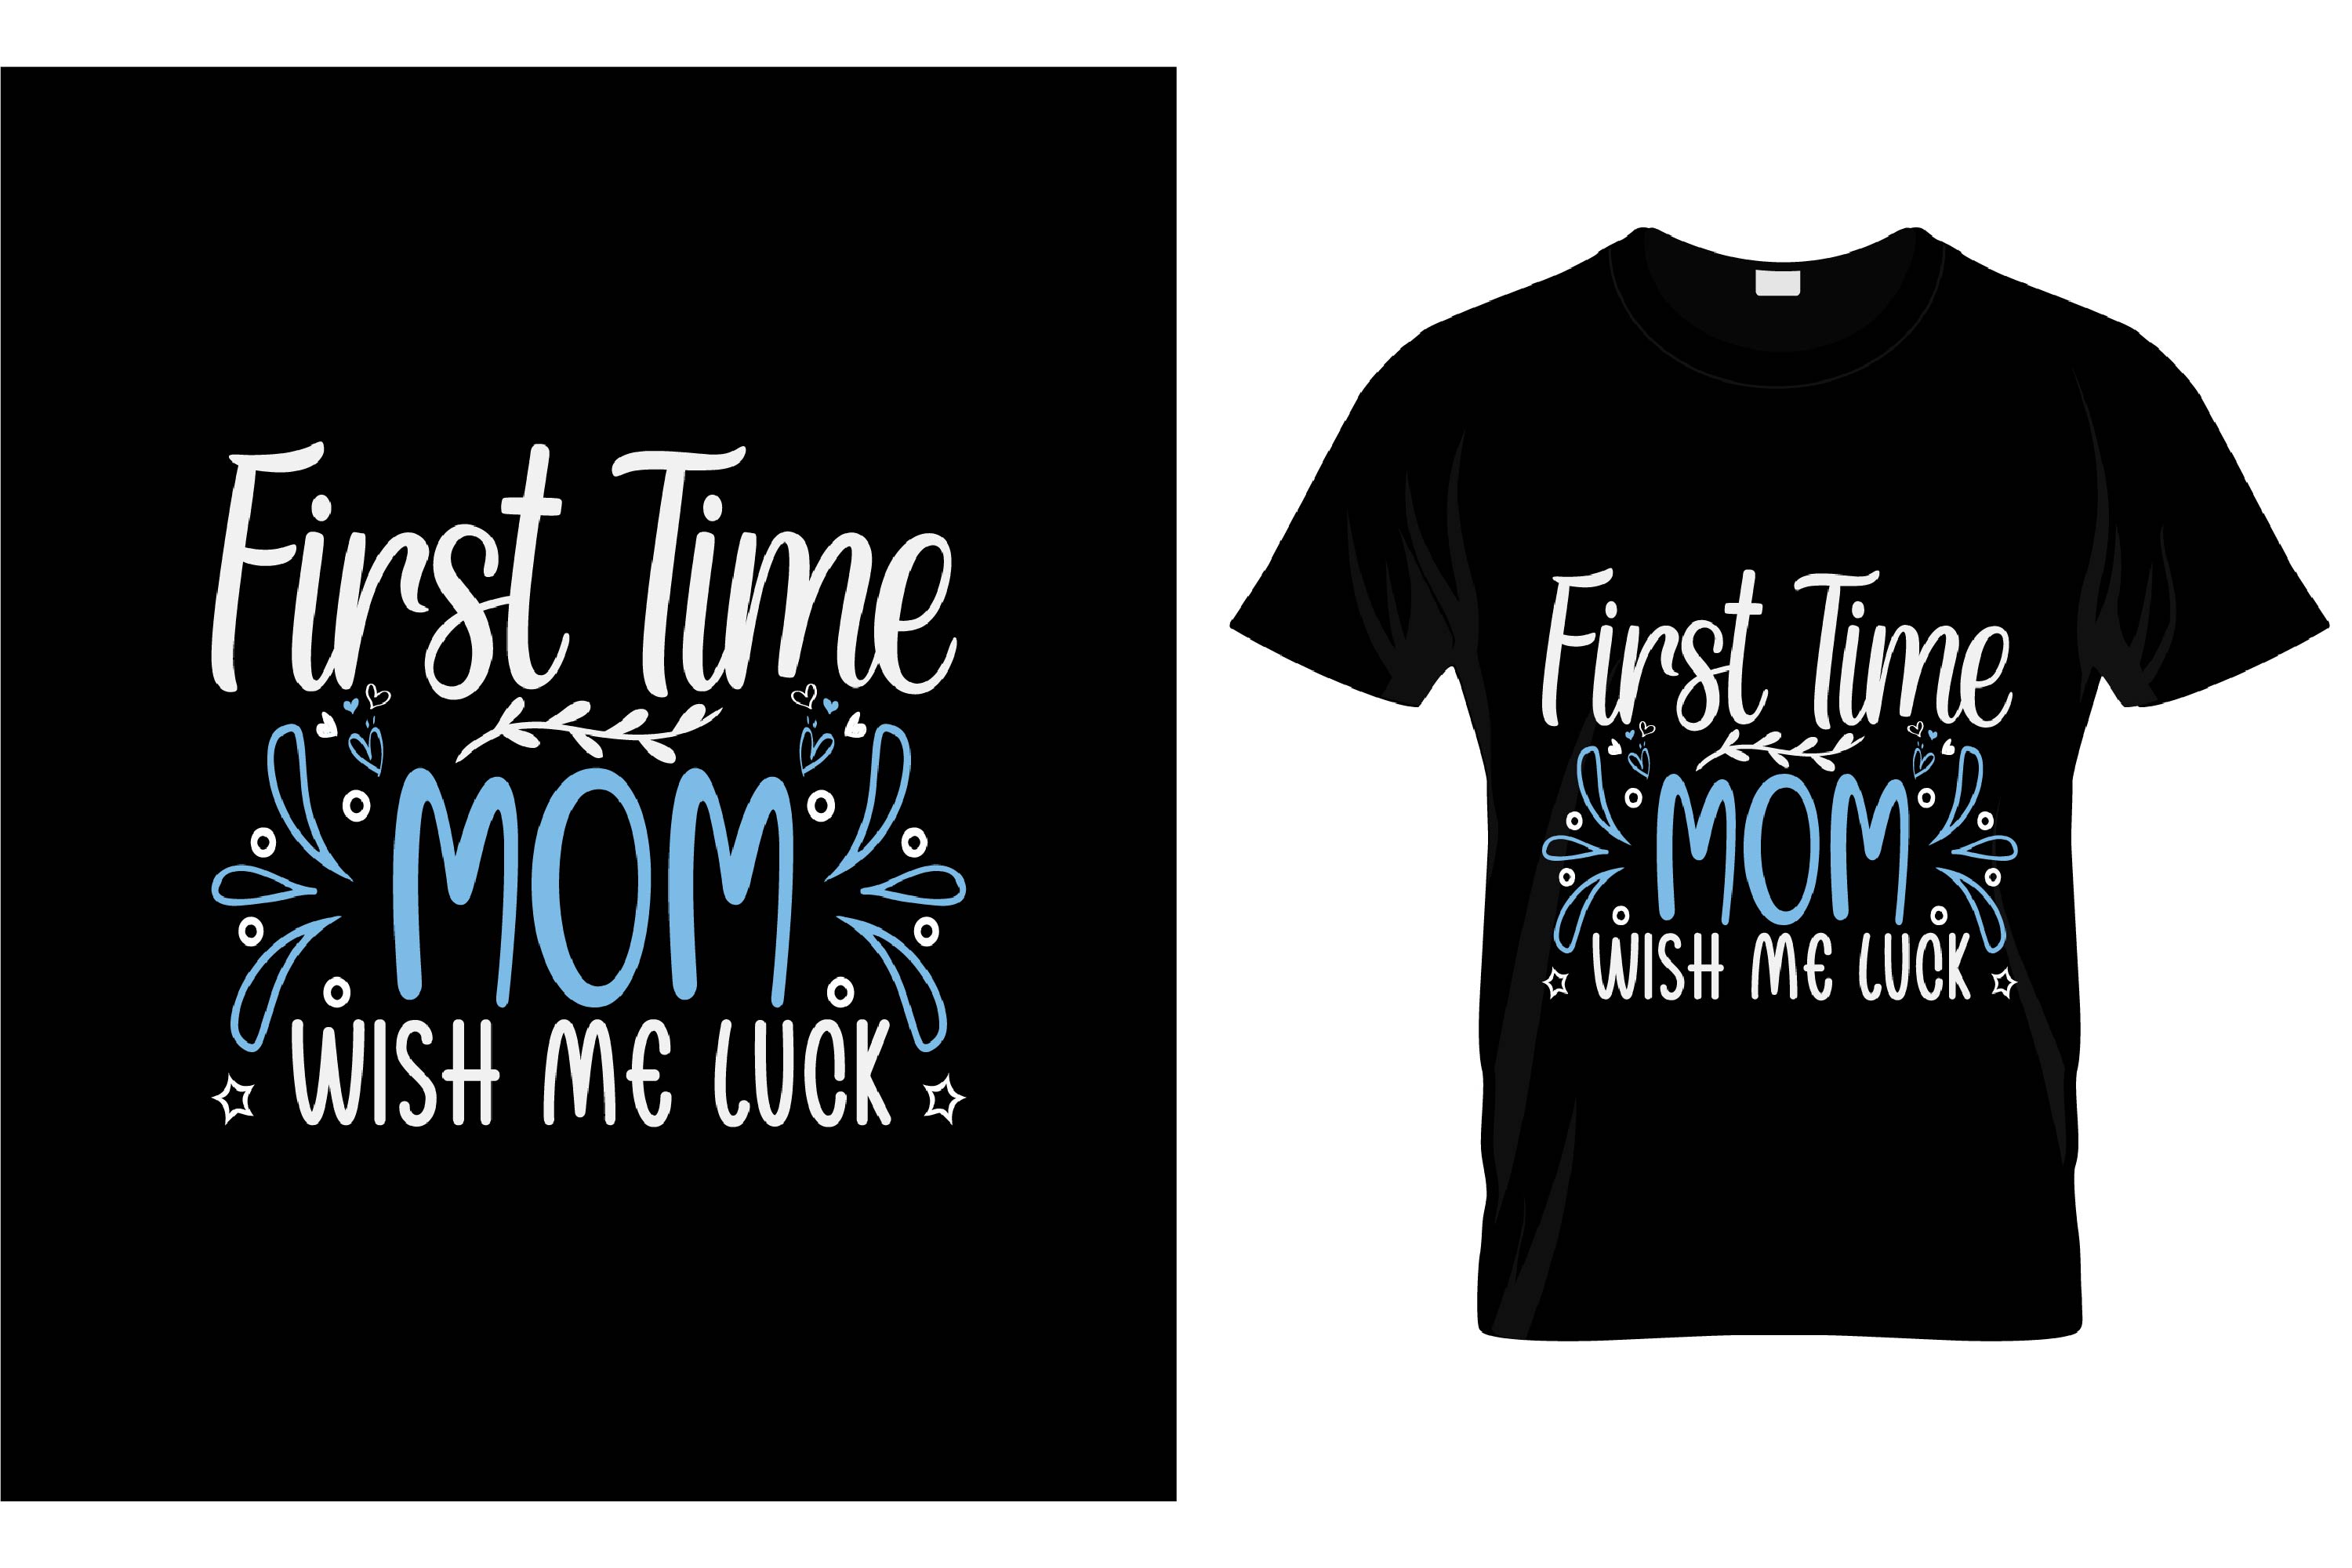 Image of a black t-shirt with an irresistible print of blue and white about mom.